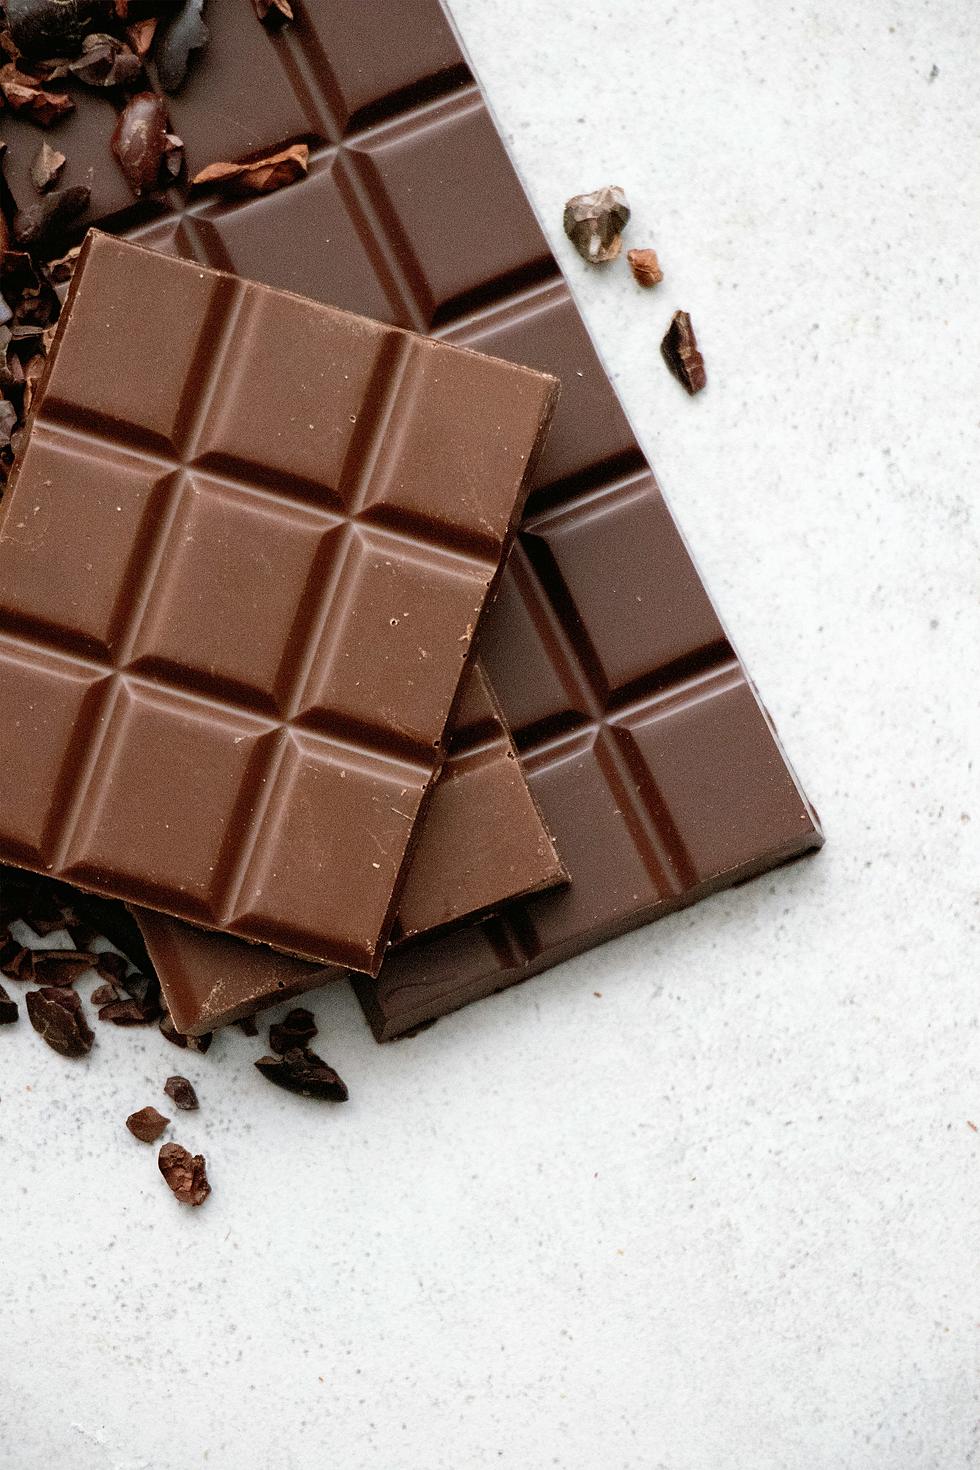 YUM! The New Jersey Chocolate Expo Is This Weekend